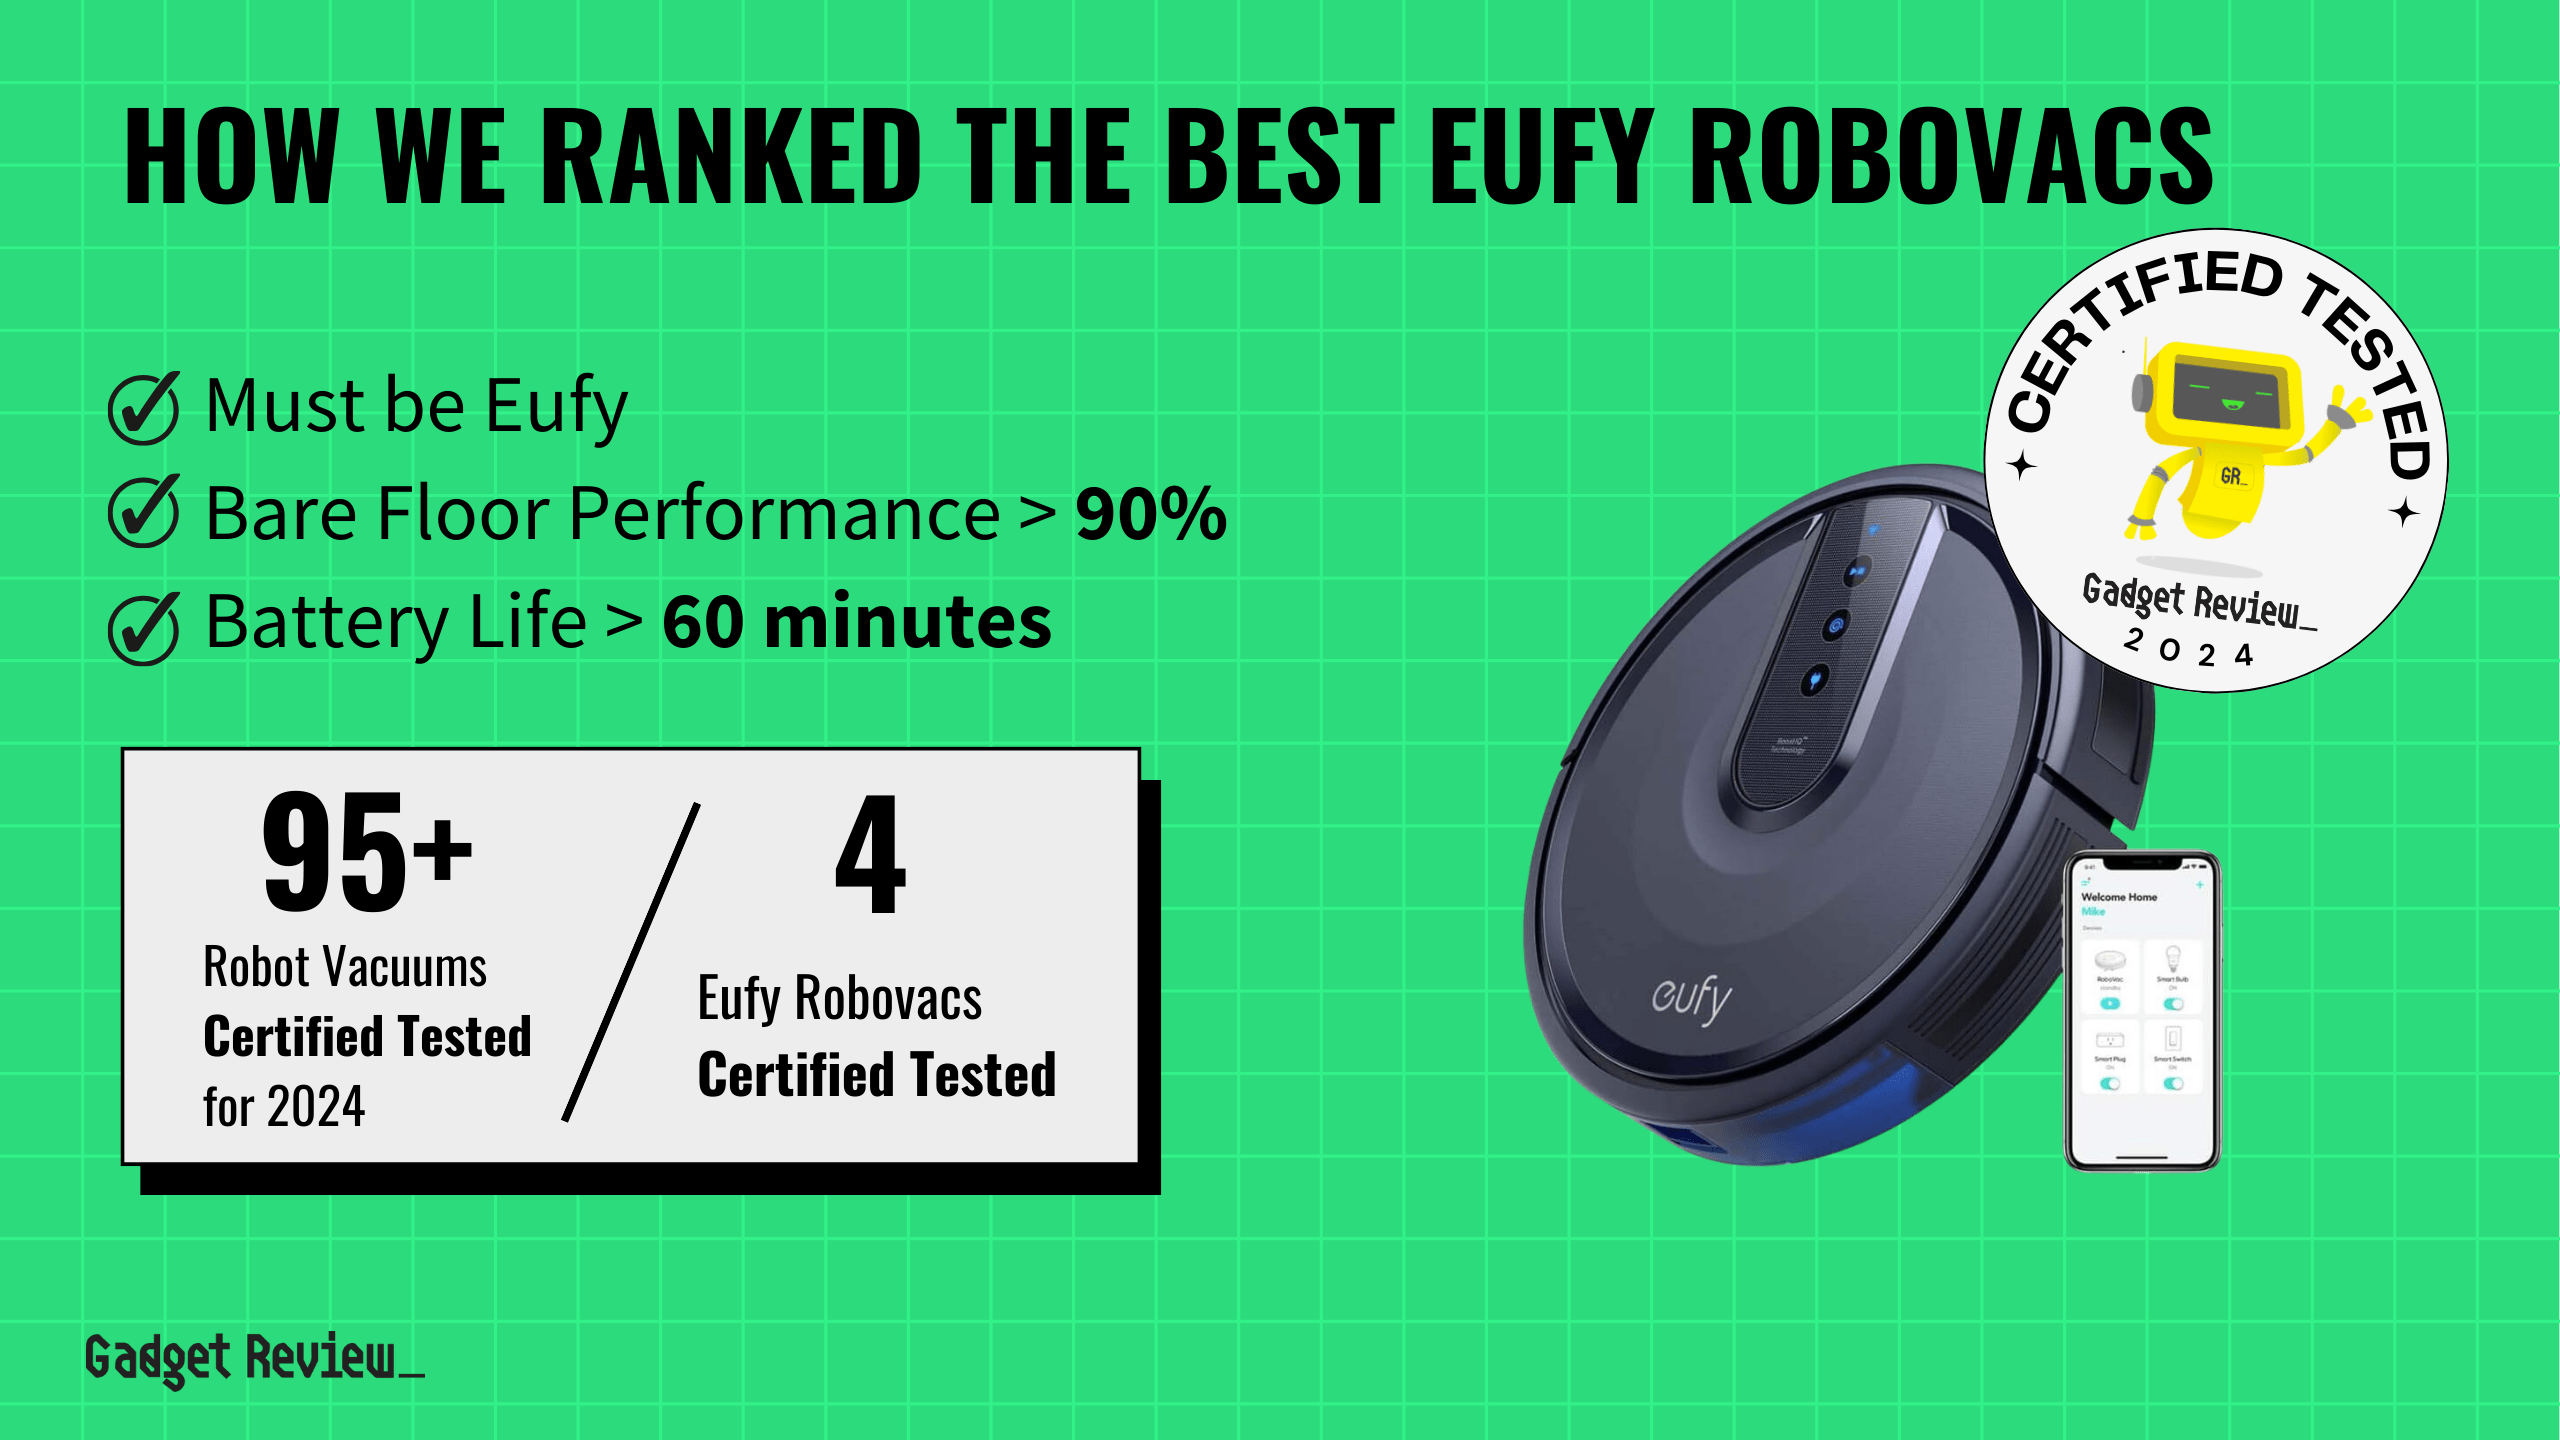 best eufy robovac guide that shows the top best robot vacuum model